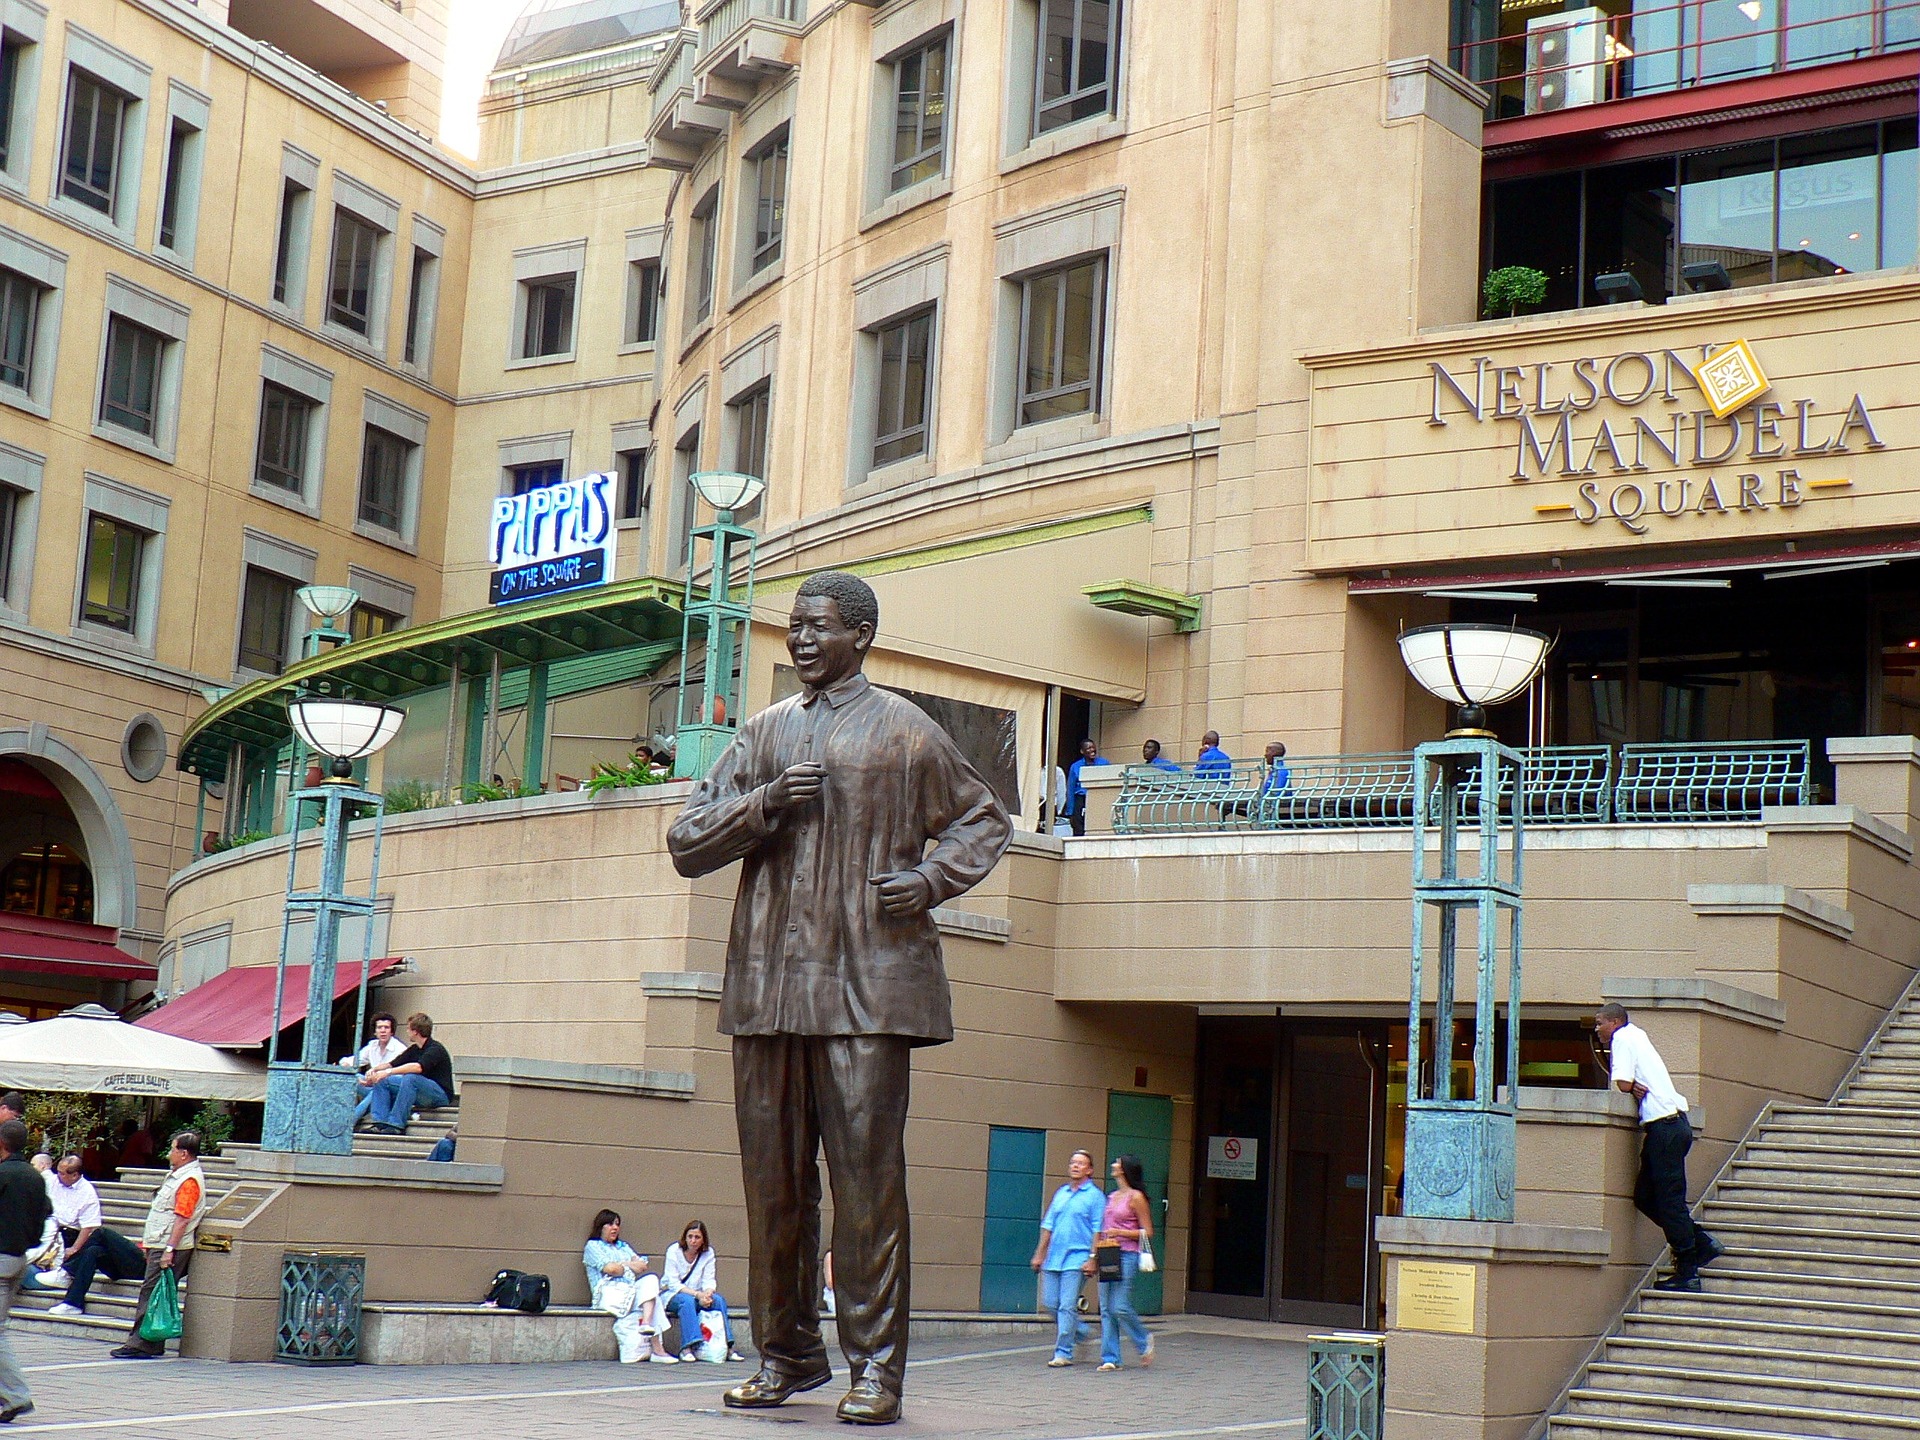 A large statue of Nelson Mandela surrounded by people in Johannesburg in South Africa